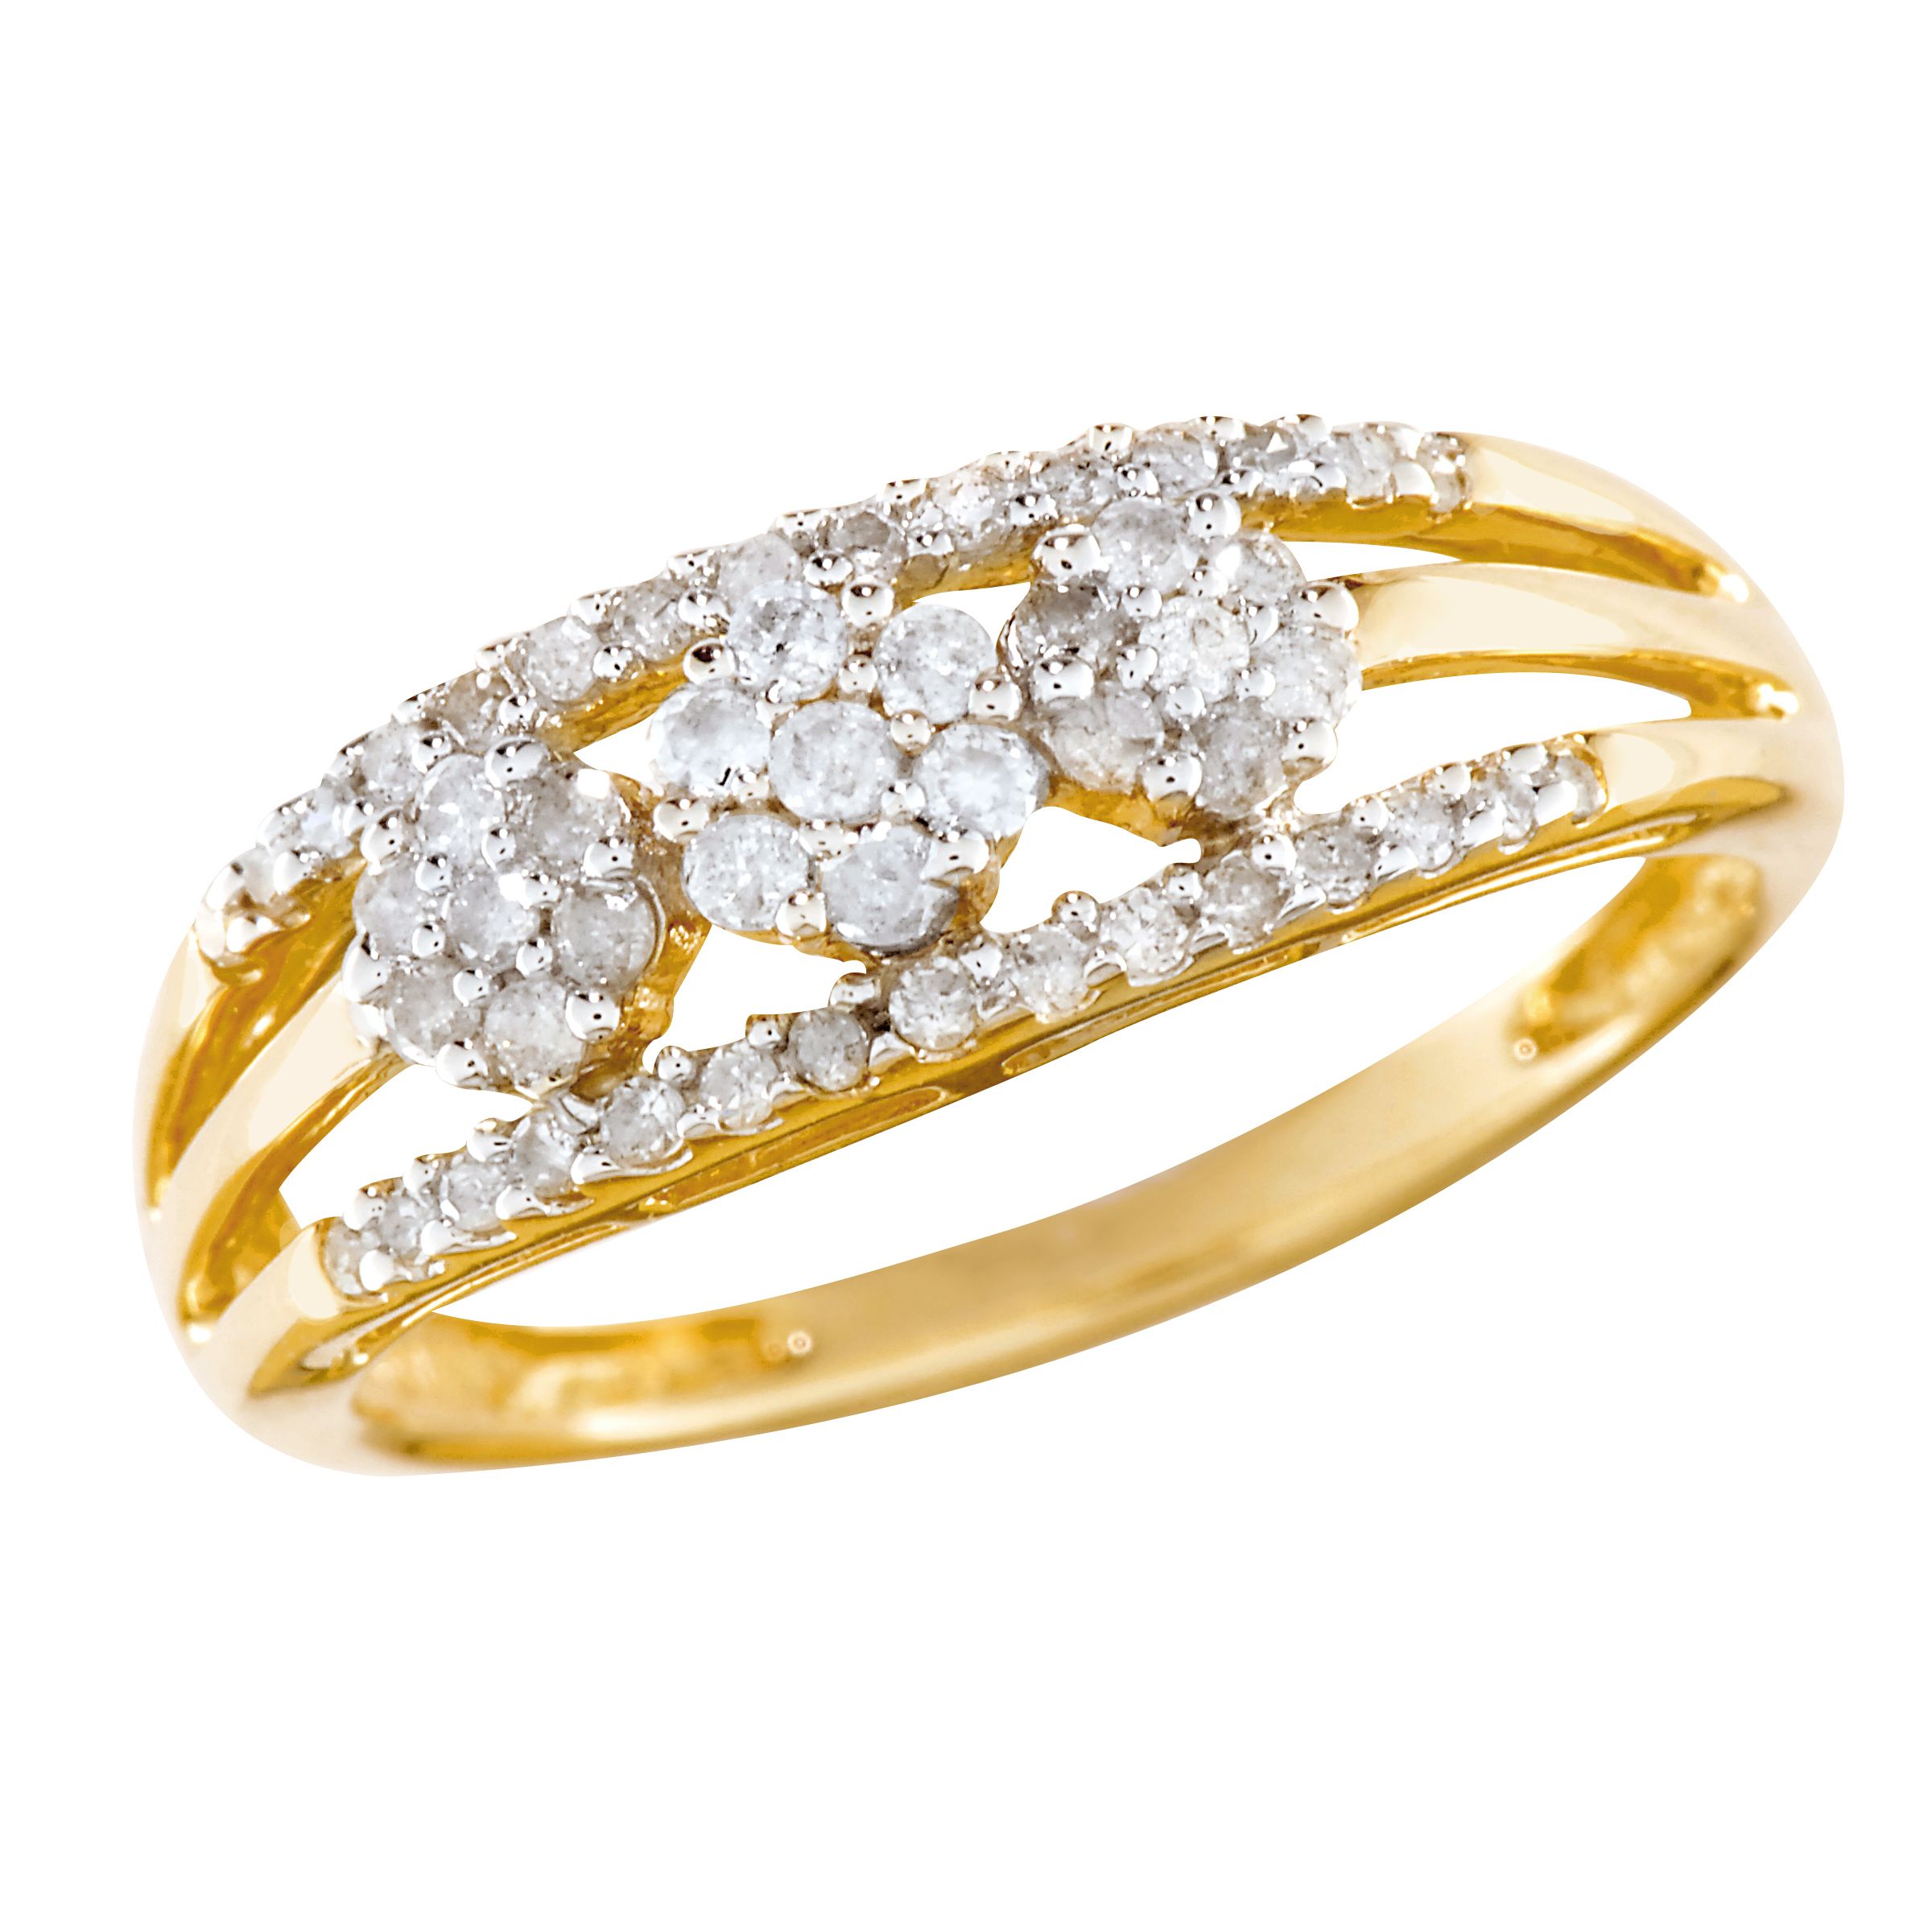 1/3 cttw Diamond Fashion Ring 10 K Yellow Gold_in Size 7